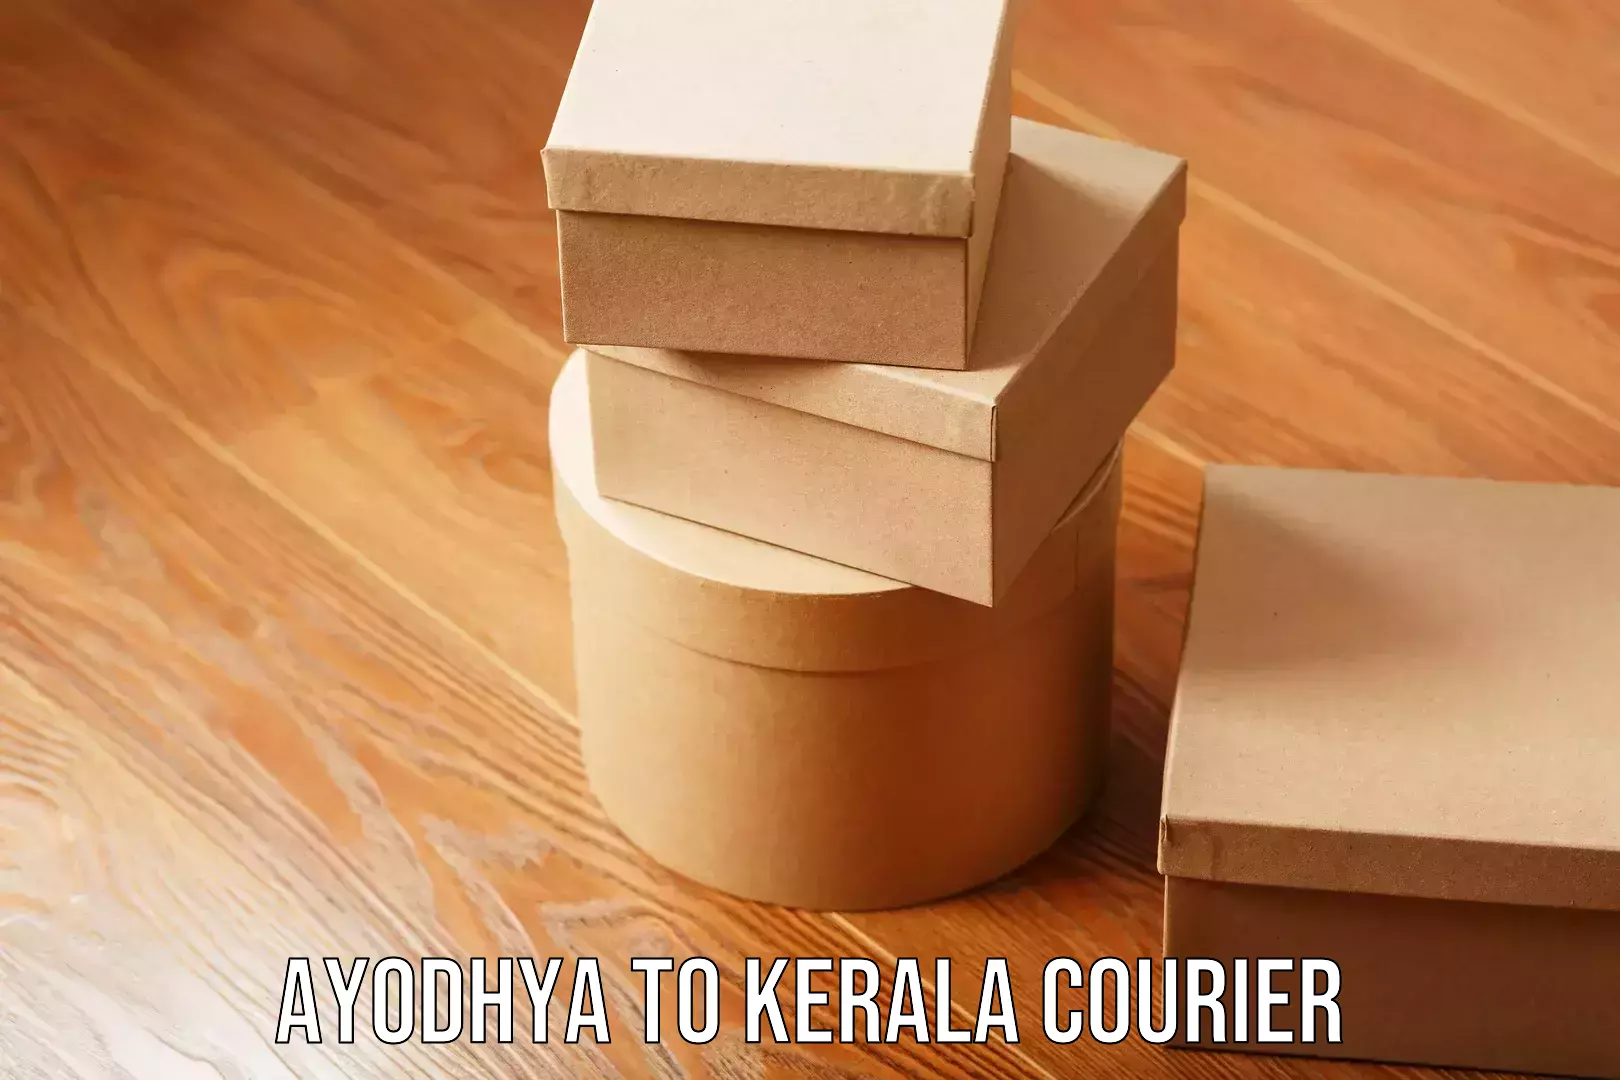 Nationwide courier service Ayodhya to Kerala